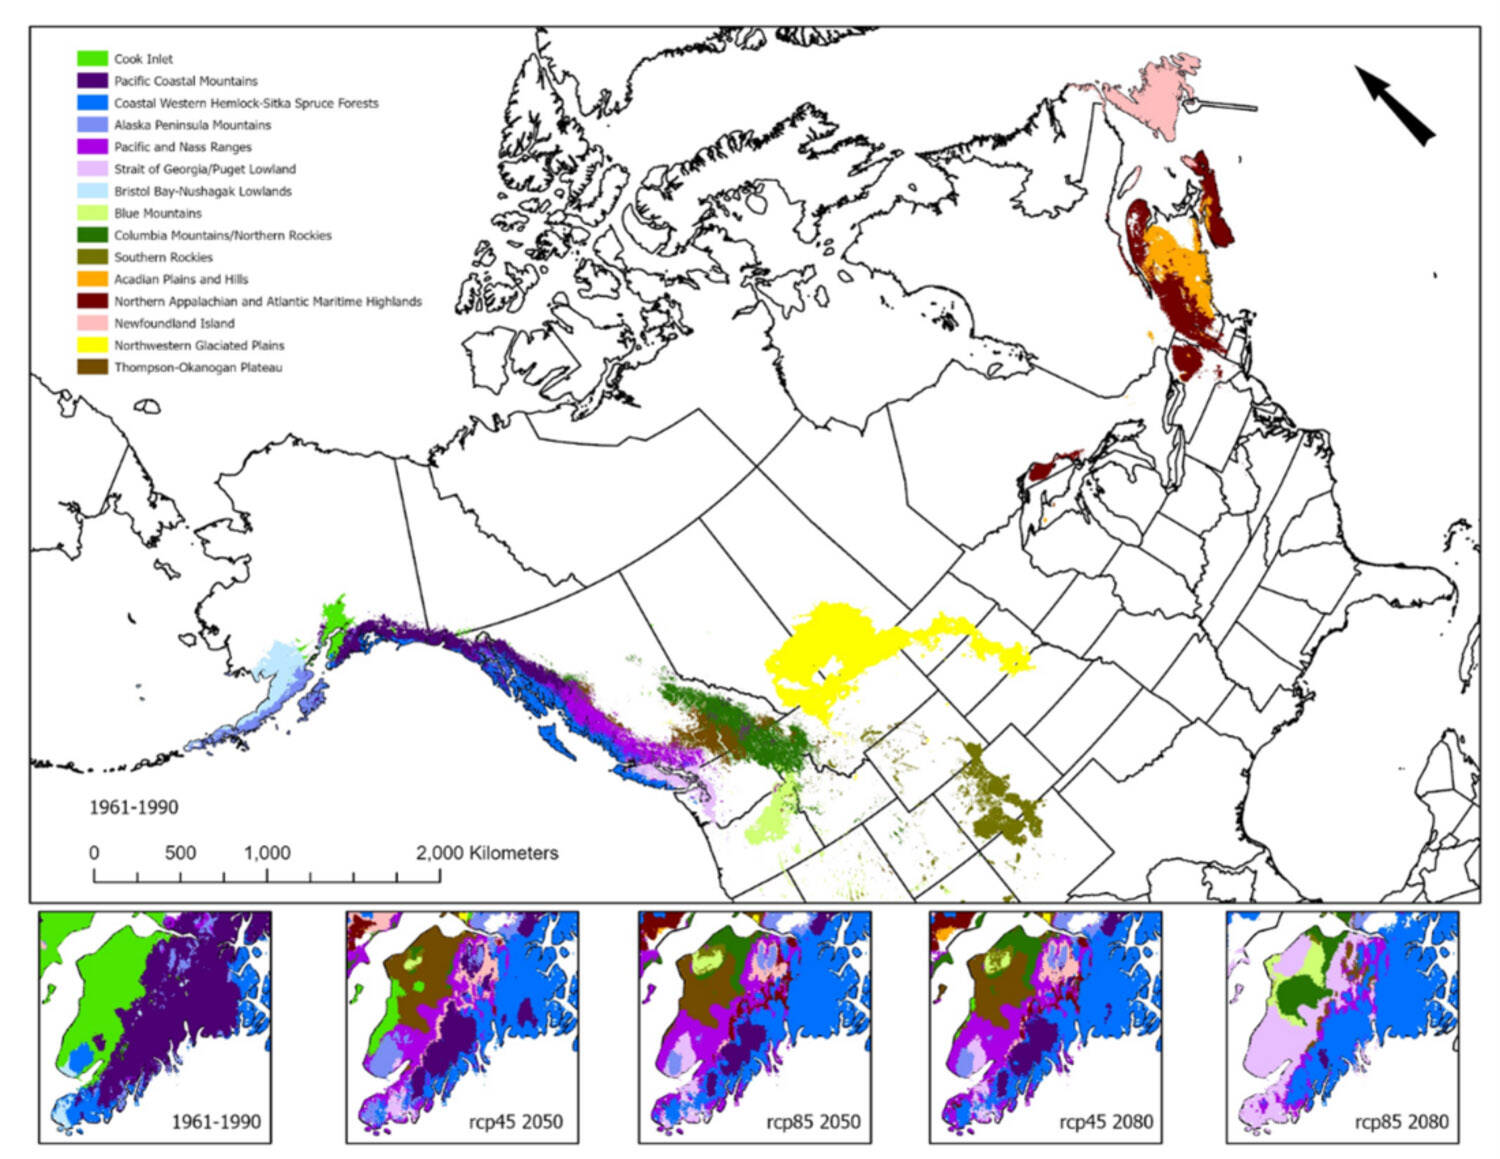 Ecoregions that are forecast to align with the future climate of the Kenai National Wildlife Refuge in 2050 and 2080 under high (rcp85) and low (rcp45) emission scenarios. The western Kenai continues to be associated with temperate rainforests to the south. The boreal lowlands can be associated with a variety of ecoregions across North America. Data reference: Stralberg, D. 2019. Velocity-based macrorefugia for North American ecoregions [Data set]. Zenodo. http://doi.org/10.5281/zenodo.2579337.